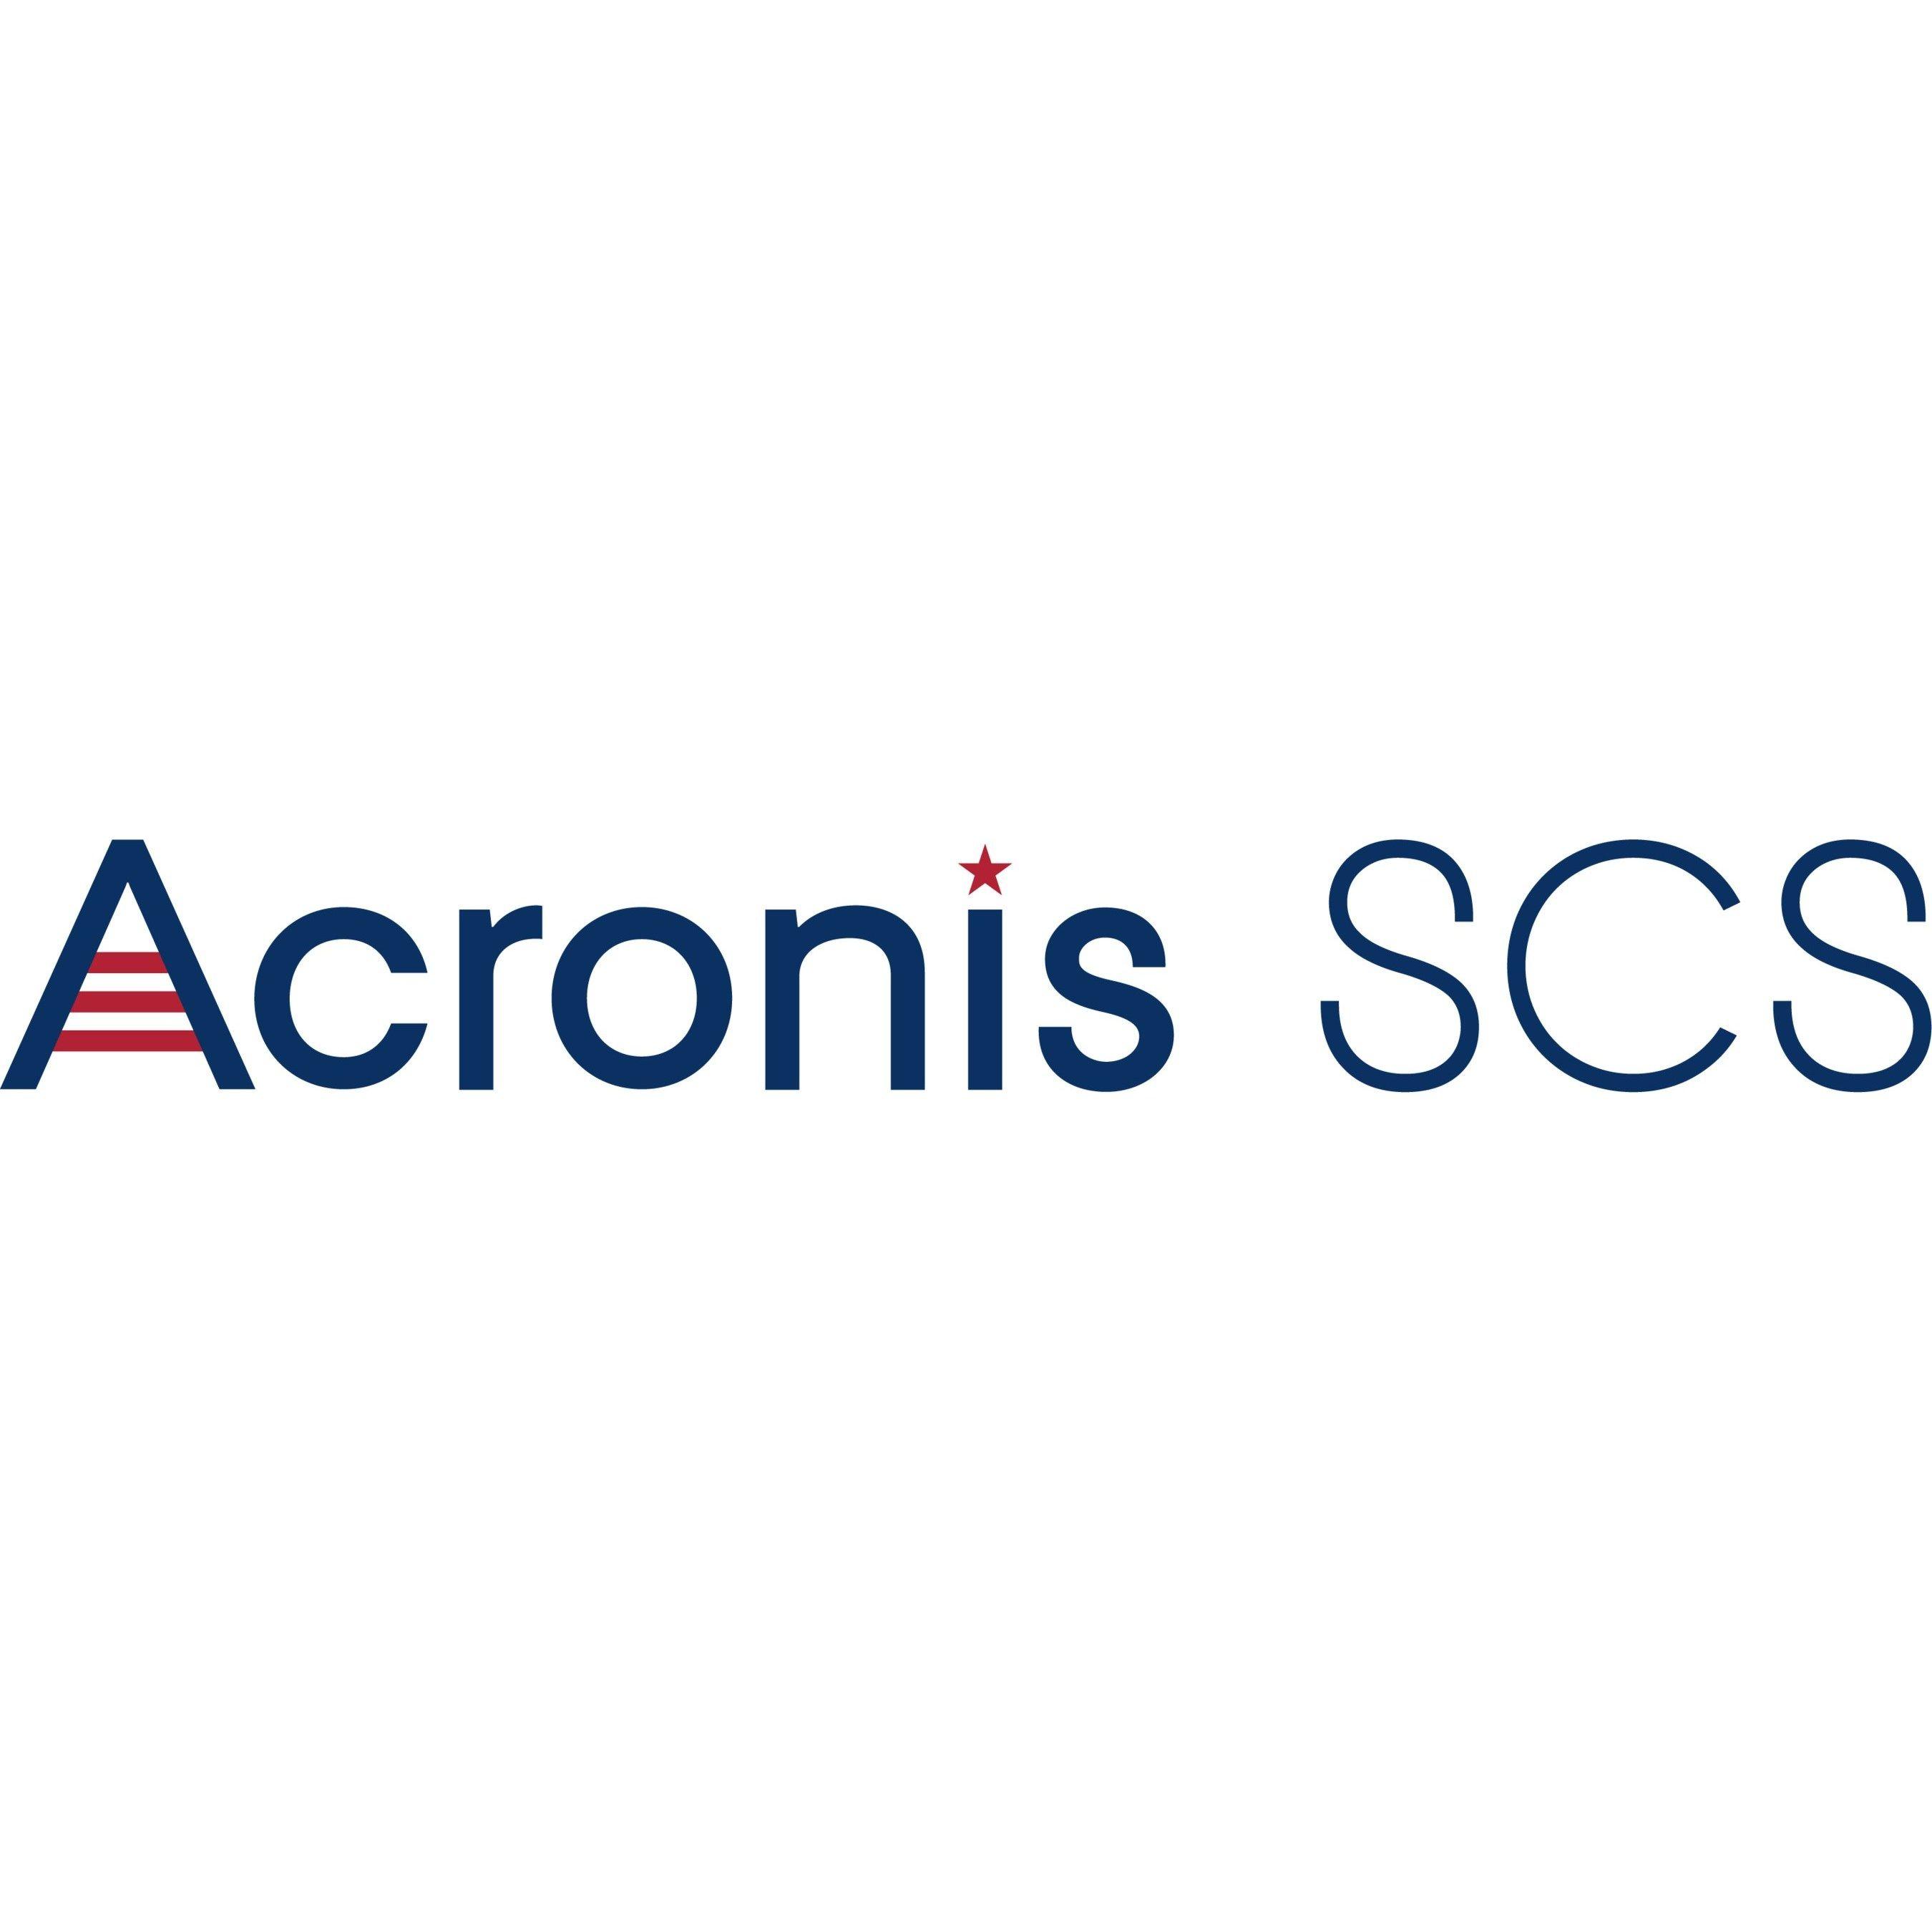 Aronis Logo - Acronis SCS: A New Company Solely Dedicated to Securing the U.S